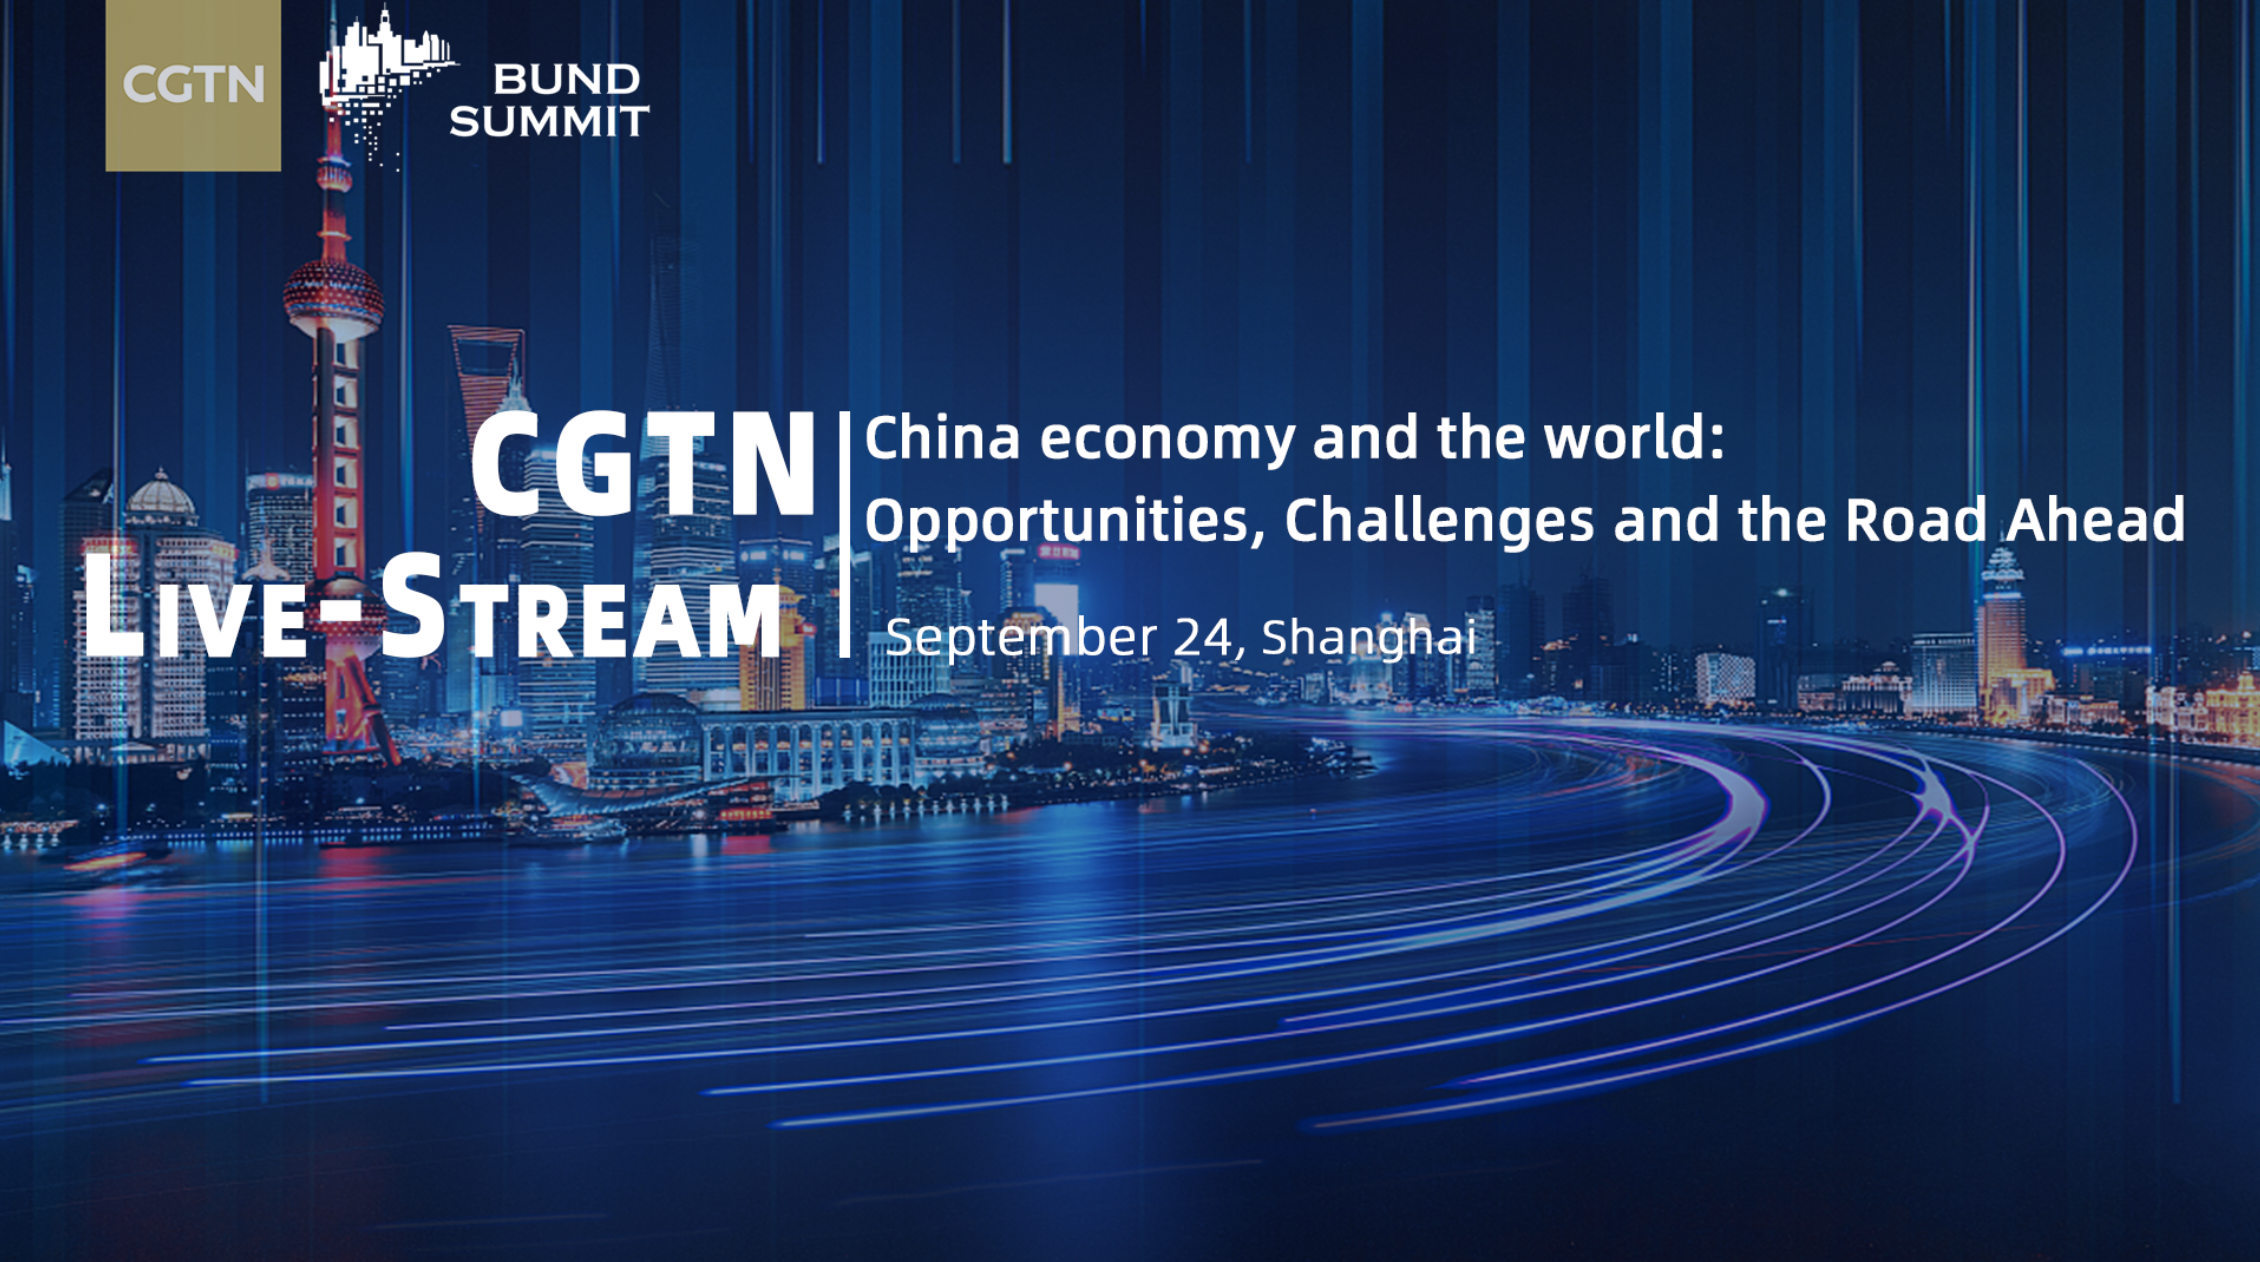 Live: China economy and the world - opportunities, challenges and the road ahead